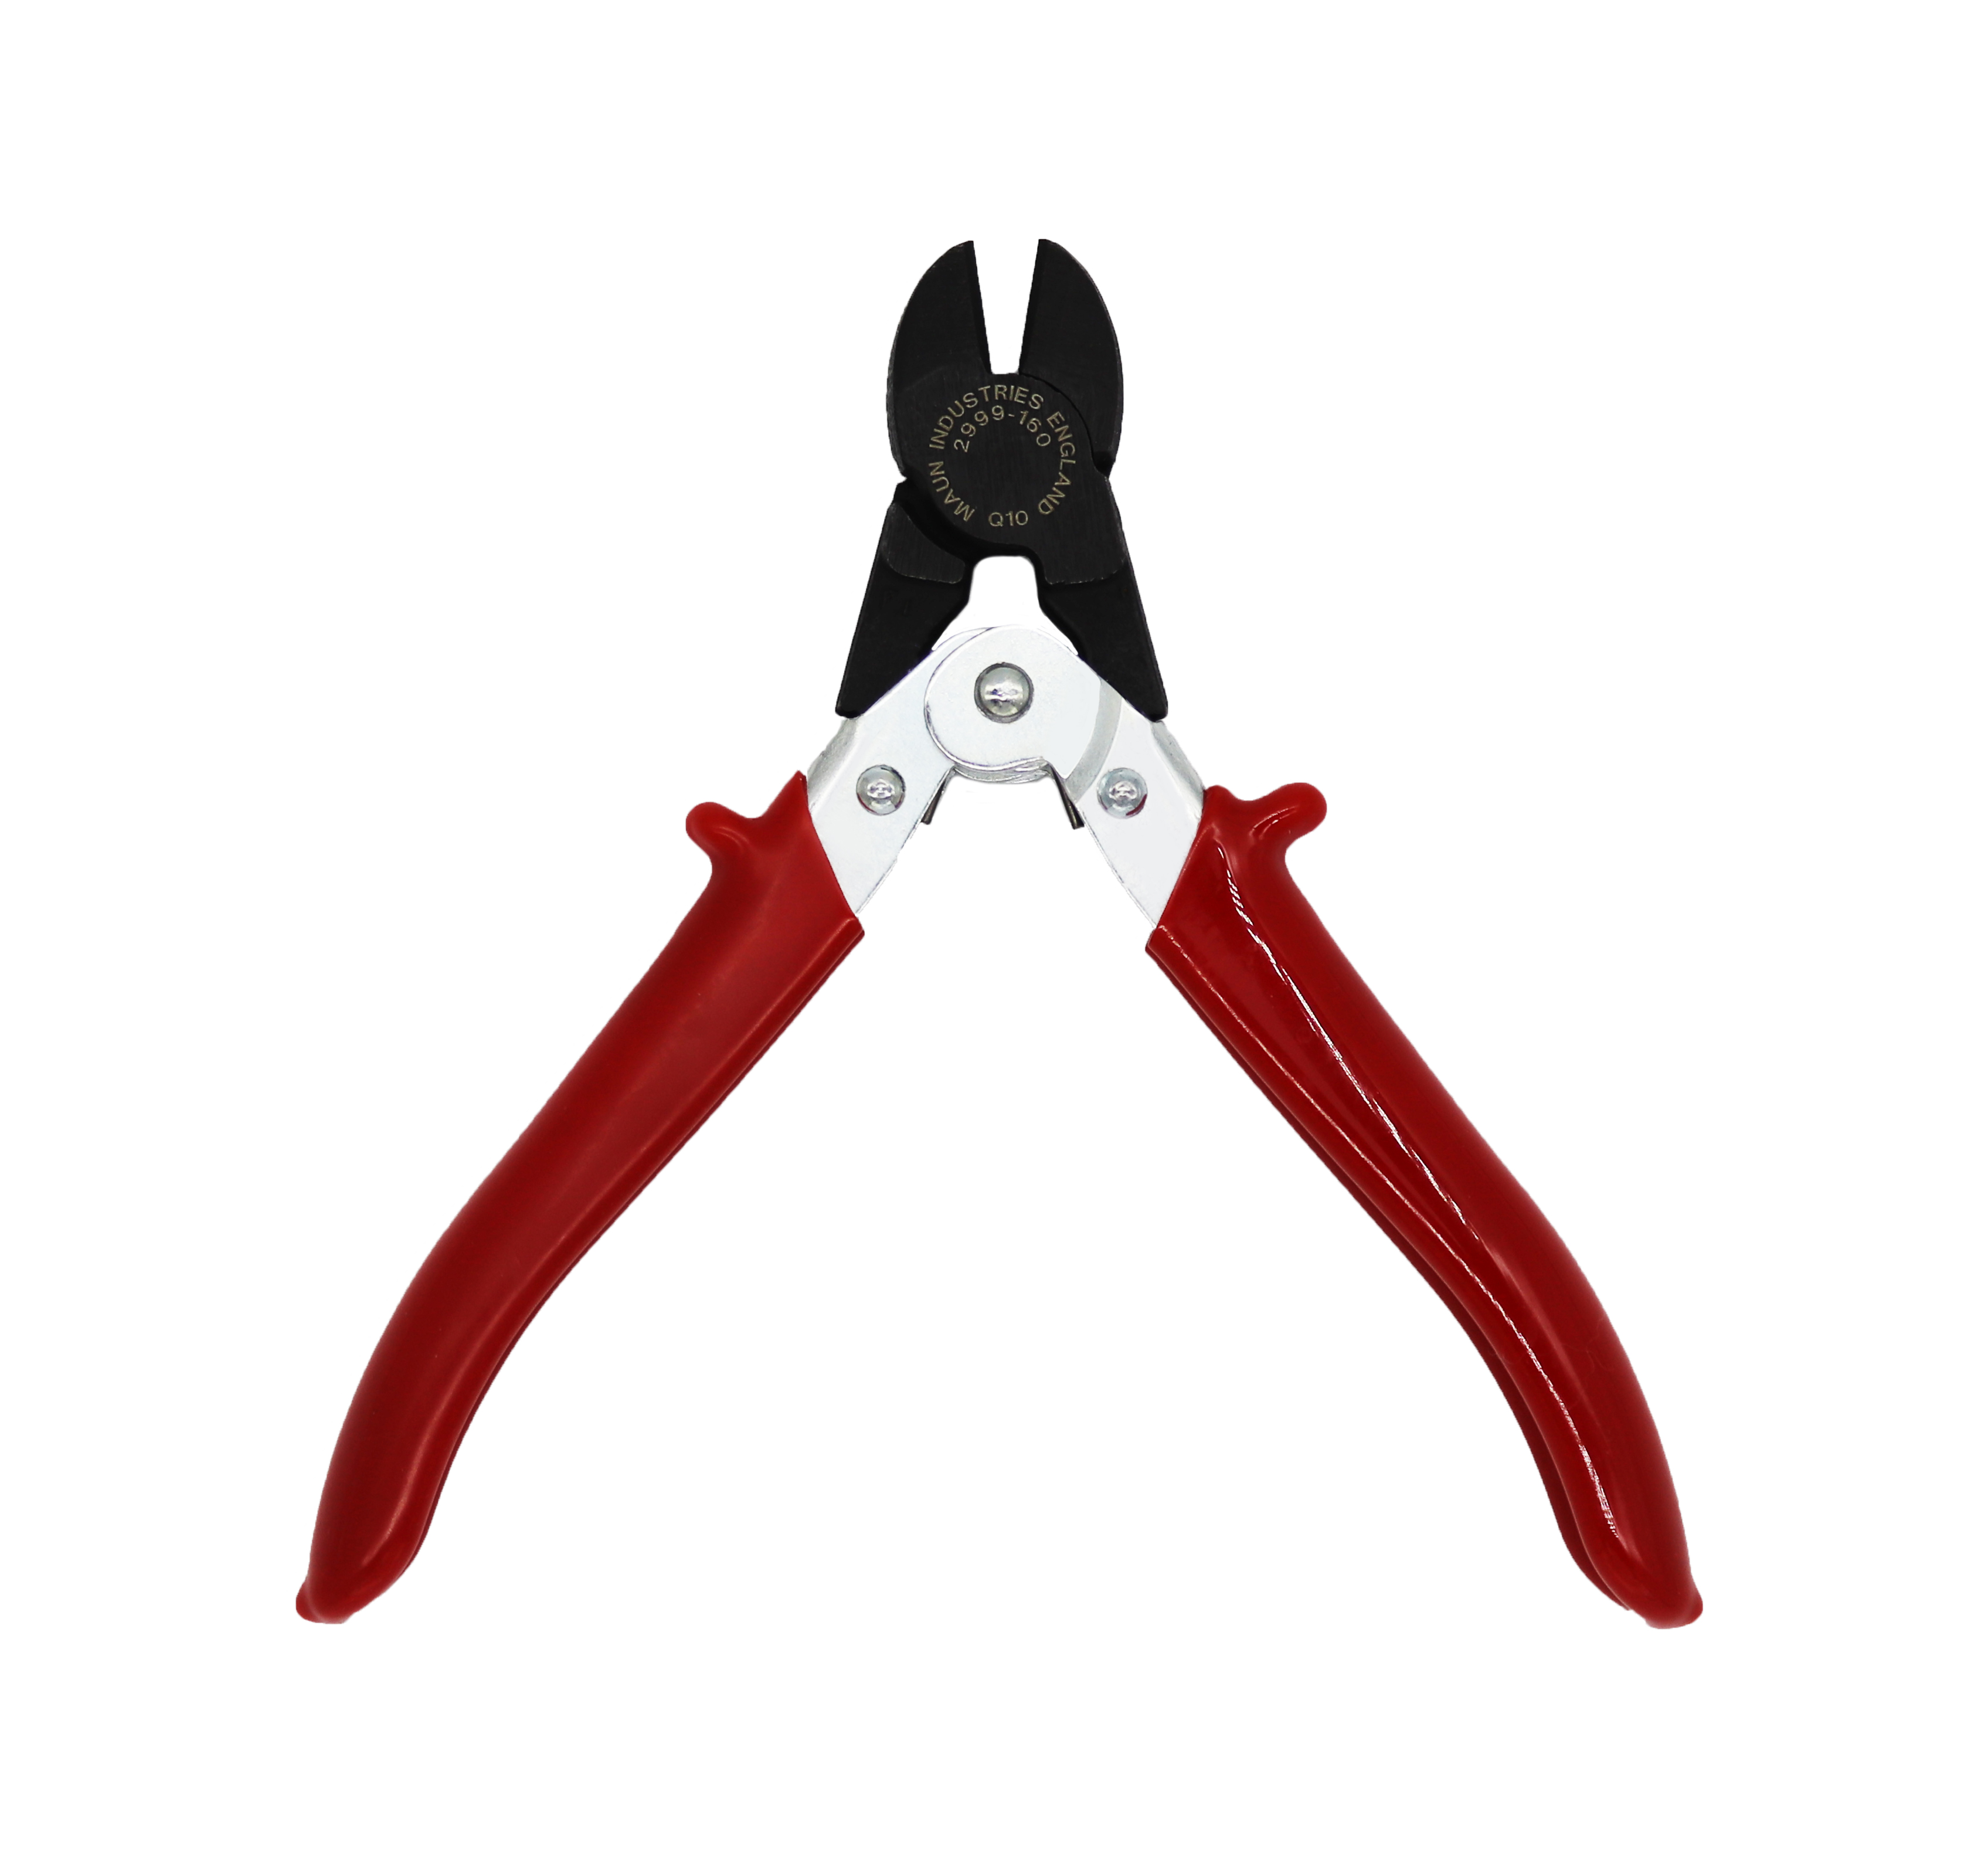 Side Cutter Pliers, Wire Cutter Pliers, Diagonal Cutting Plier, Wire  Cutting Tool for Jewelry Making 